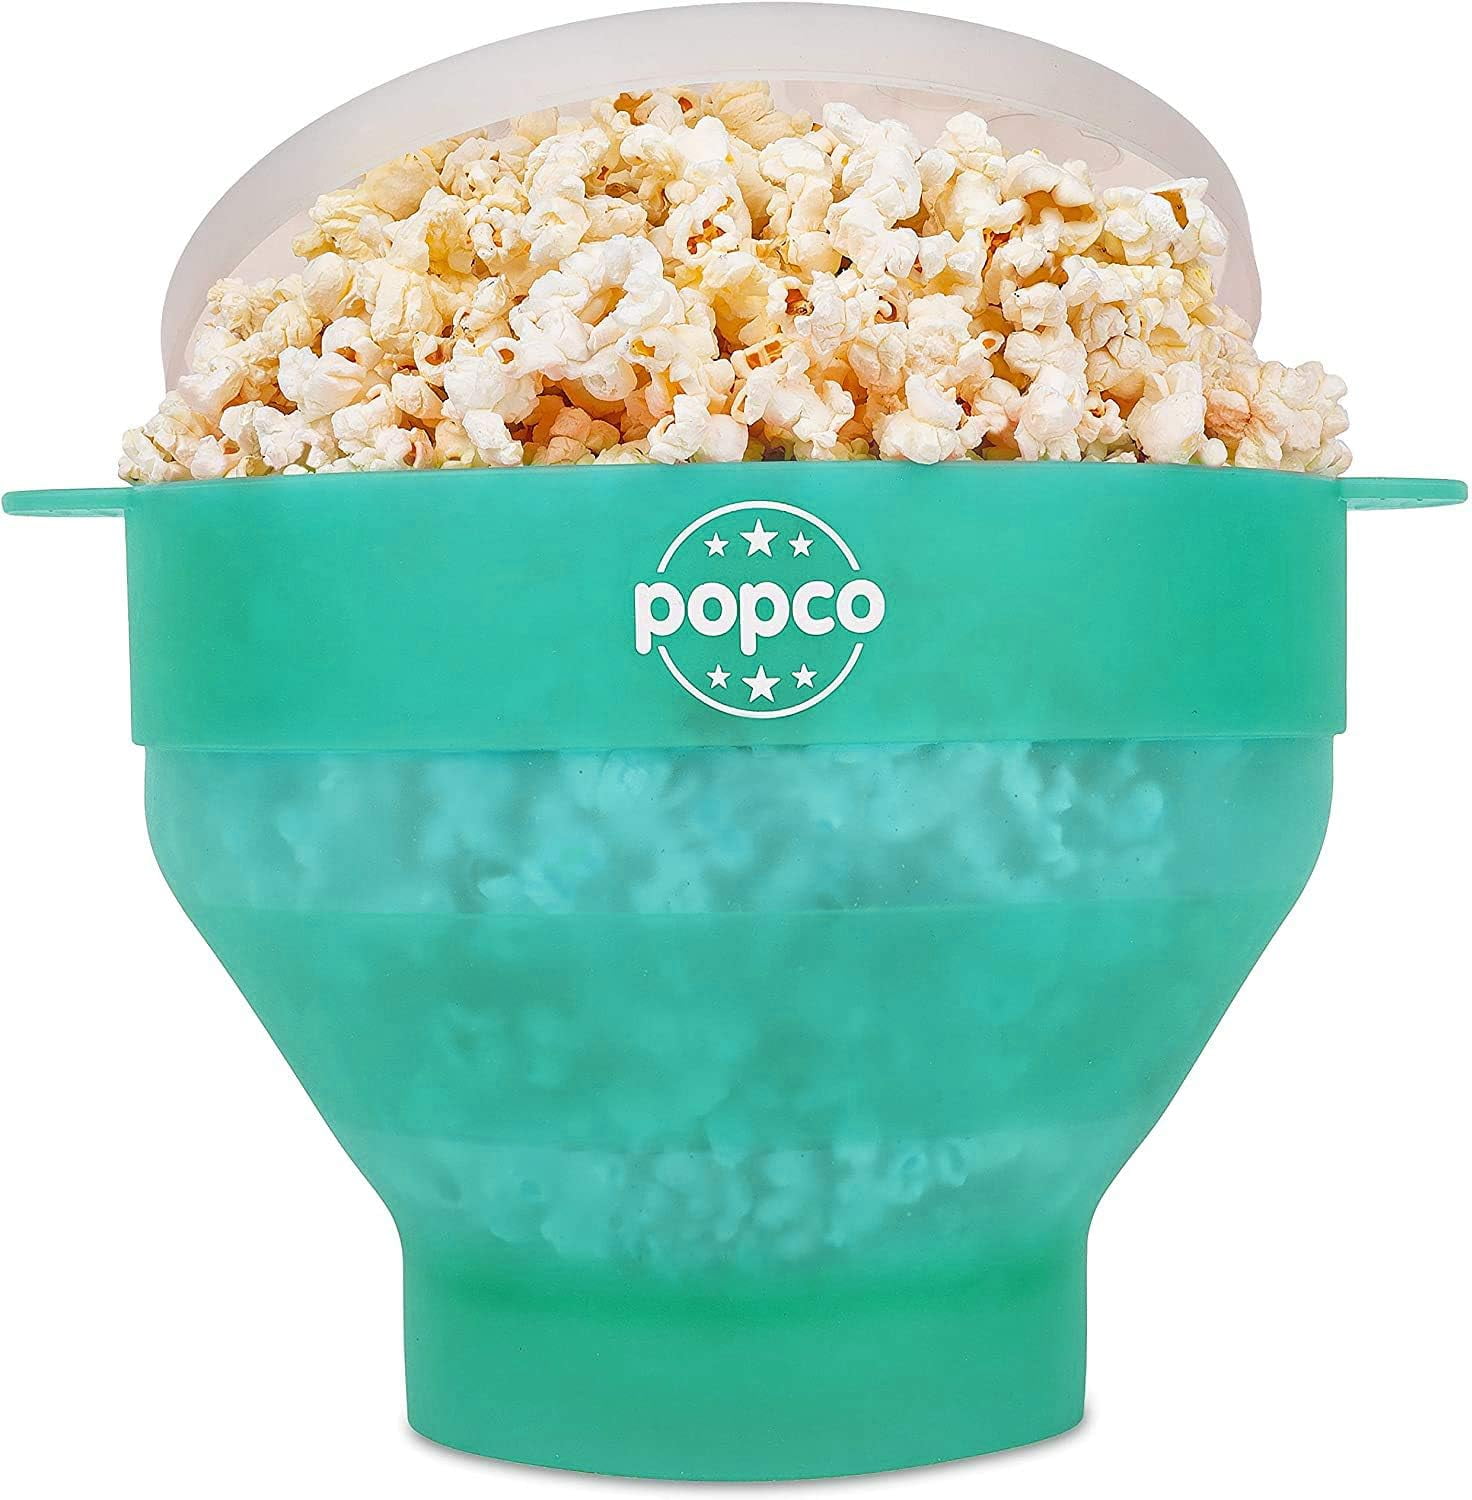 The Original Popco Silicone Microwave Popcorn Popper with Handles, Silicone  Popcorn Maker, Collapsible Popcorn Bowls Bpa Free and Dishwasher Safe - 15  Colors Av… [Video] [Video]